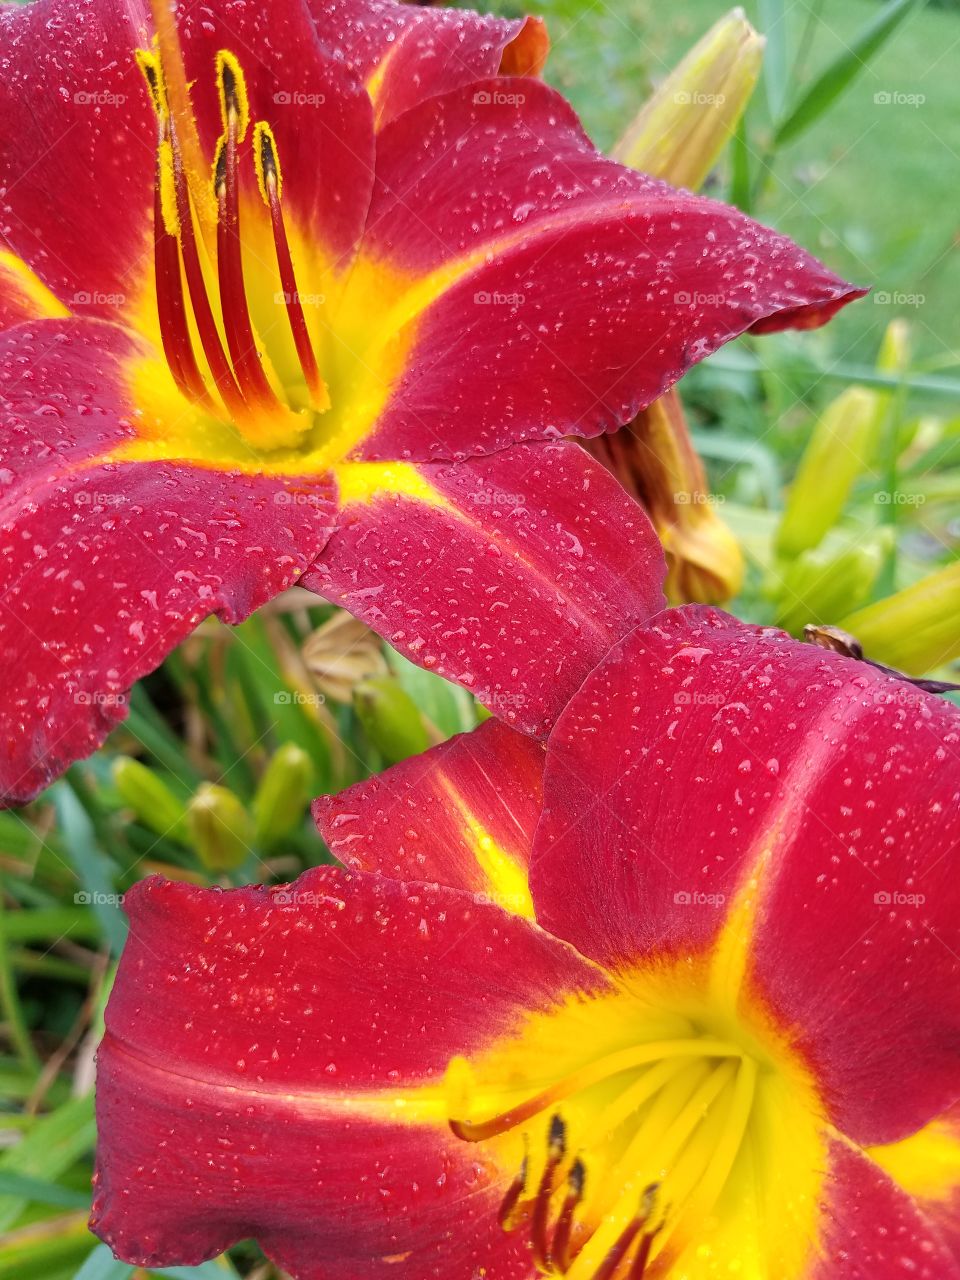 Brightly colored flowers